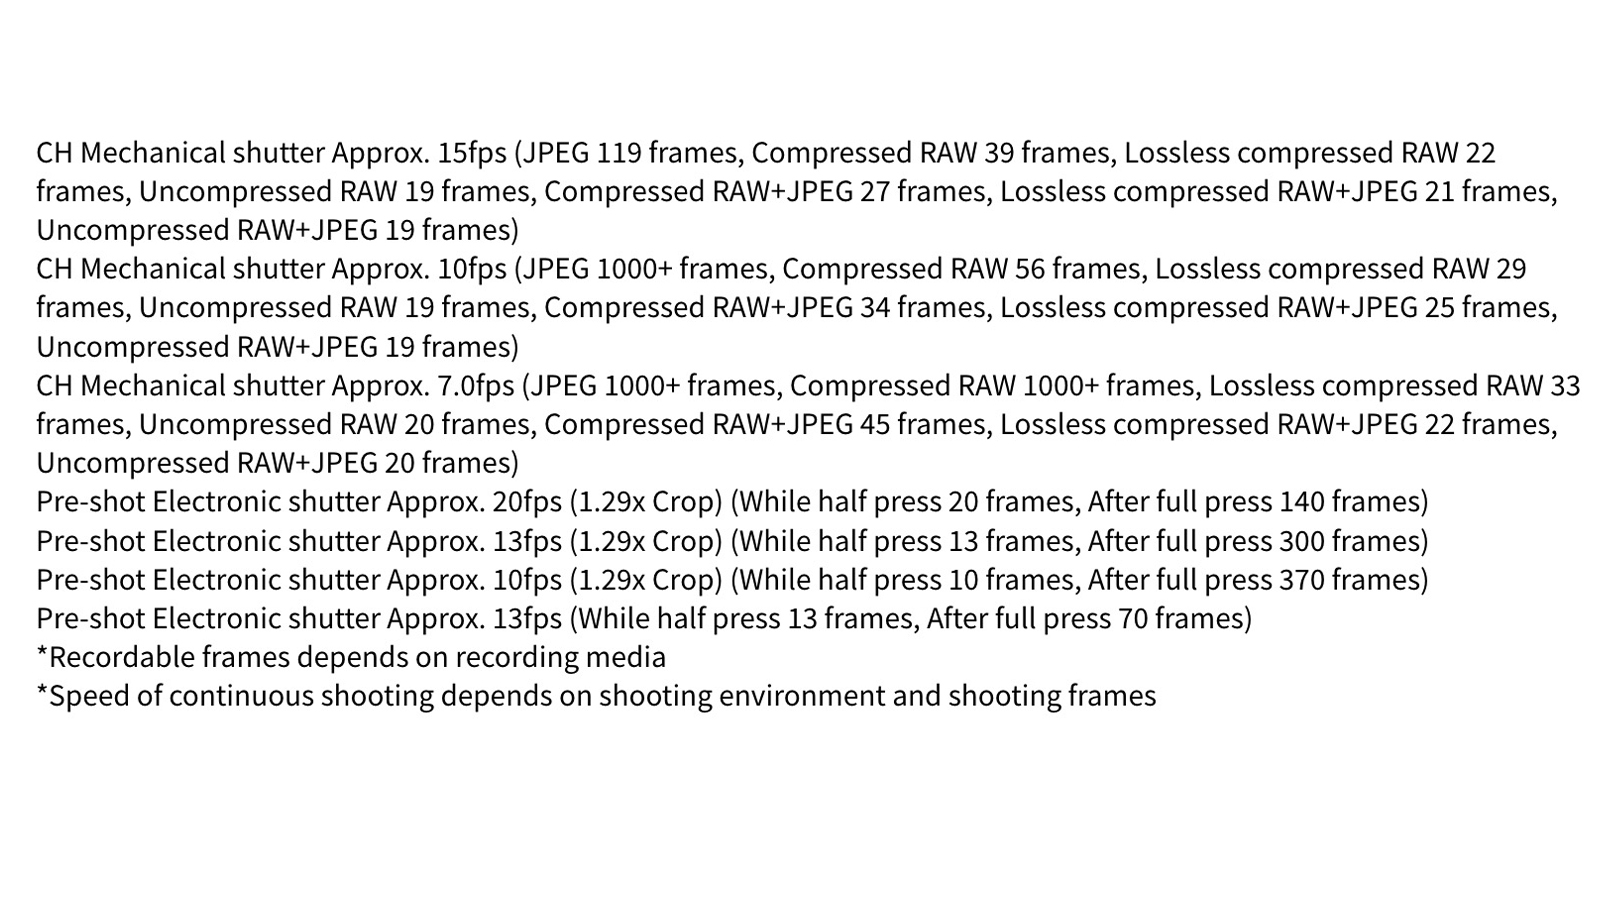 The continuous shooting specs of the Fujifilm X-T5